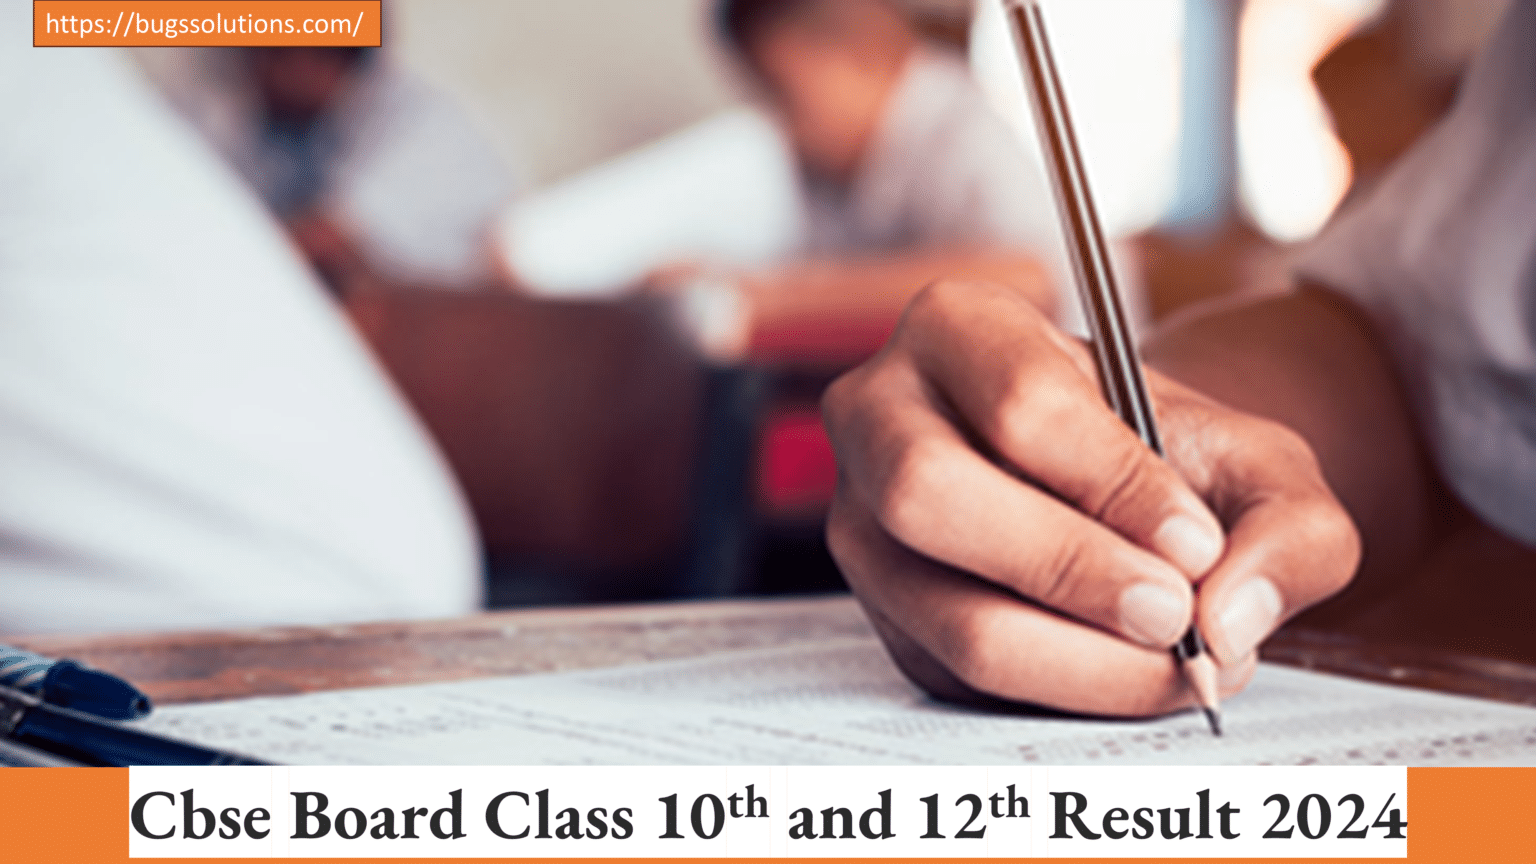 Details Here. CBSE Board Class 10th And 12th Result 2024 Are Expected